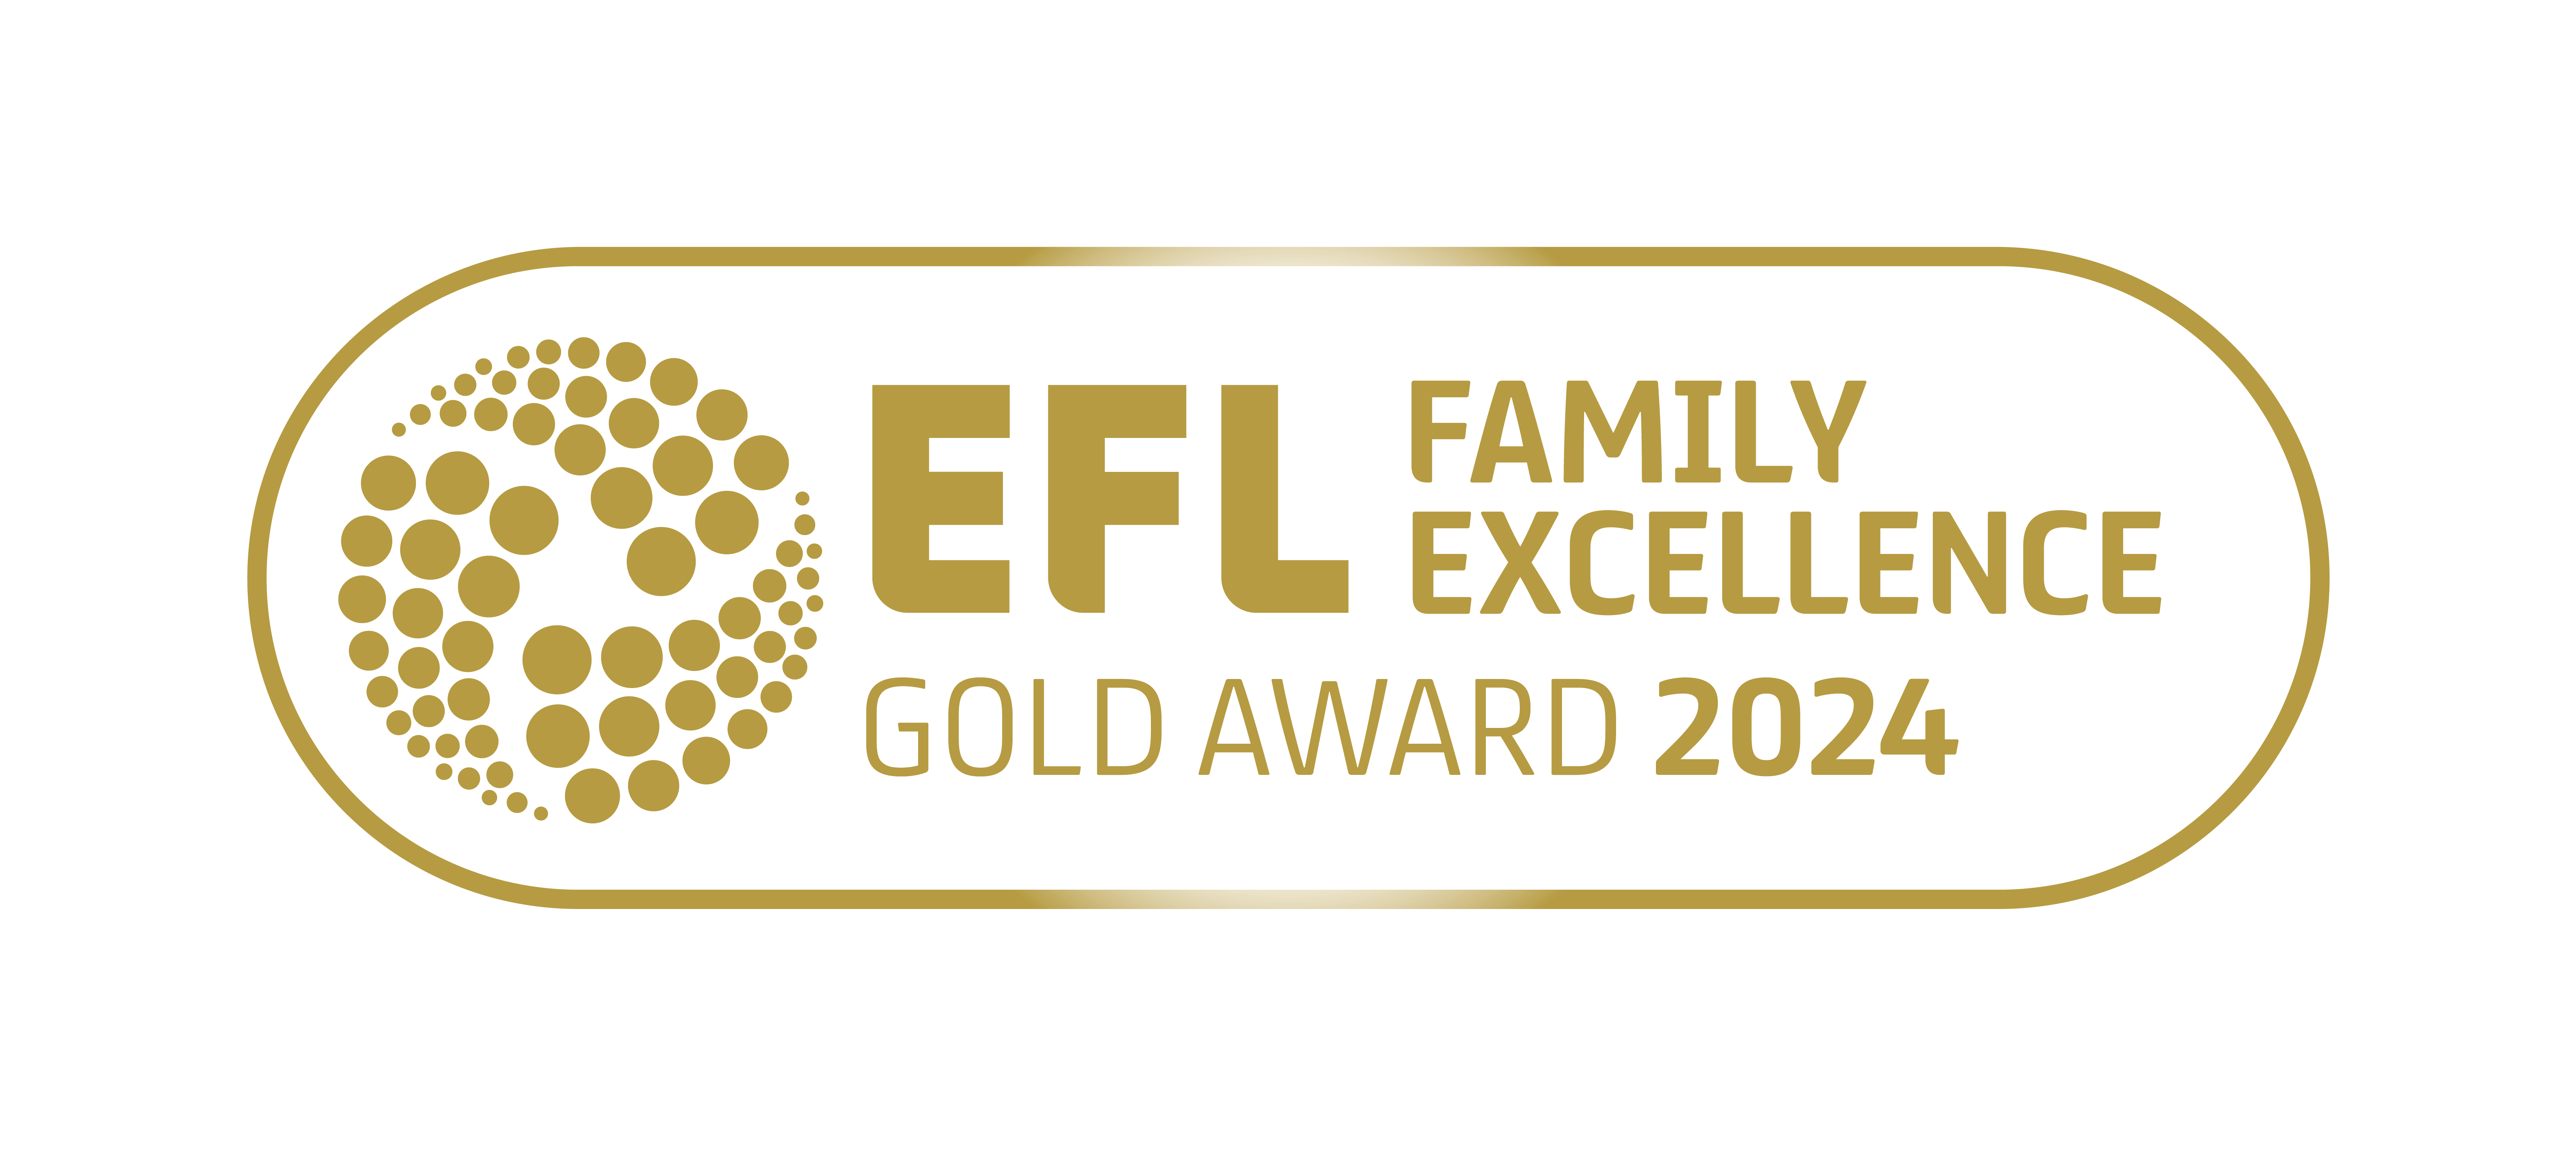 Winners of EFL Family Excellence Award 2024